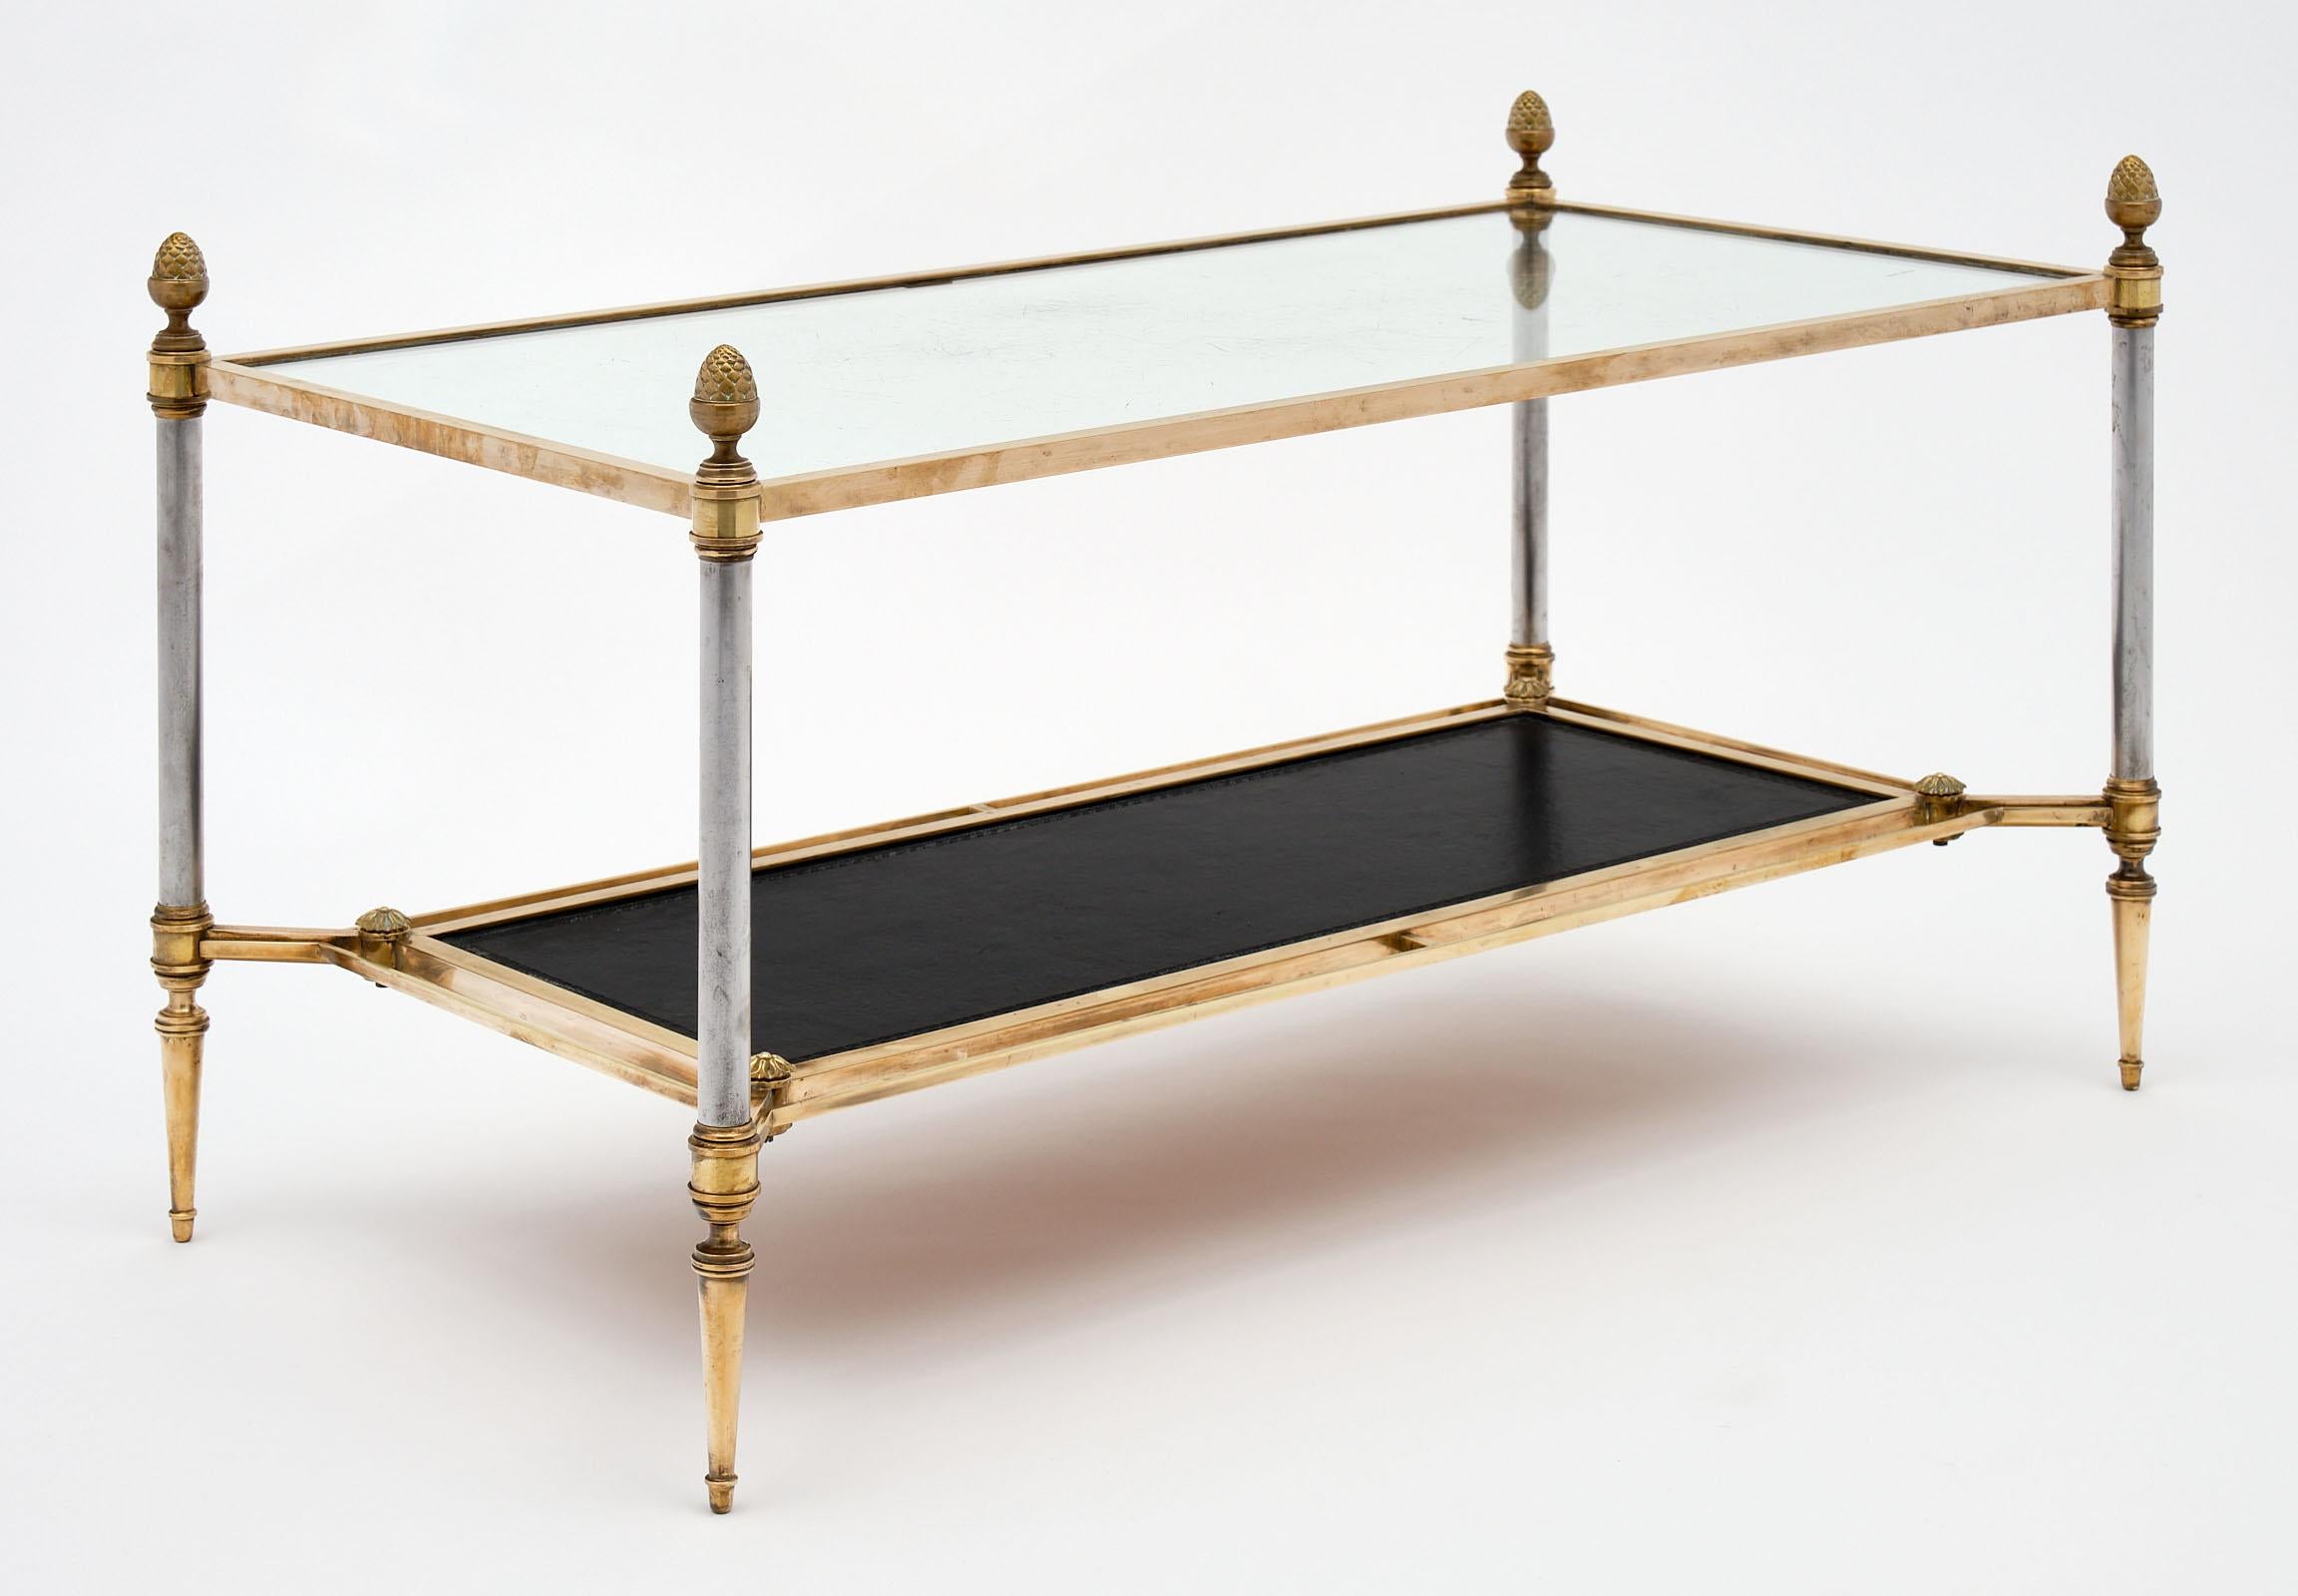 French Maison Baguès coffee table made of gilt bronze and steel. We love the finely cast details of acorns. This piece features a clear glass top and a black leather covered shelf.